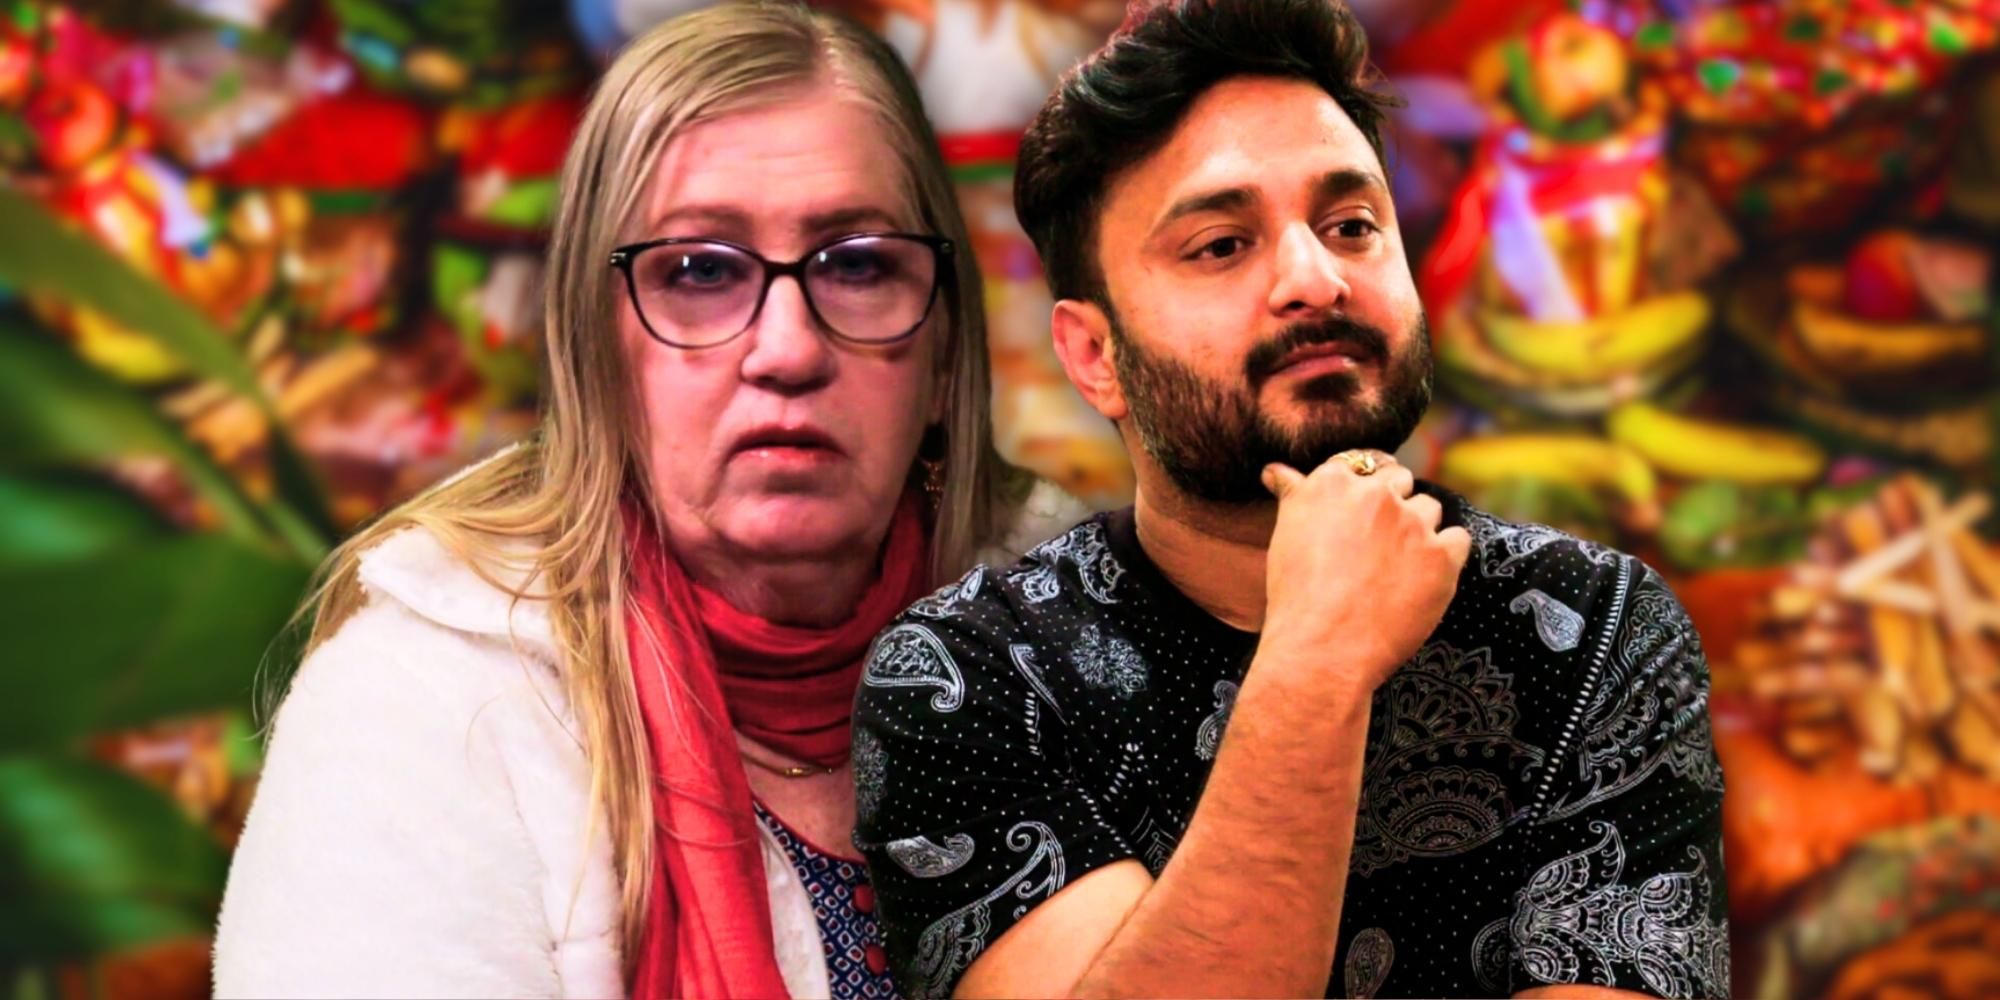 90 Day Fiancé’s Sumit Singh & Jenny Slatten in front of multi-colored background